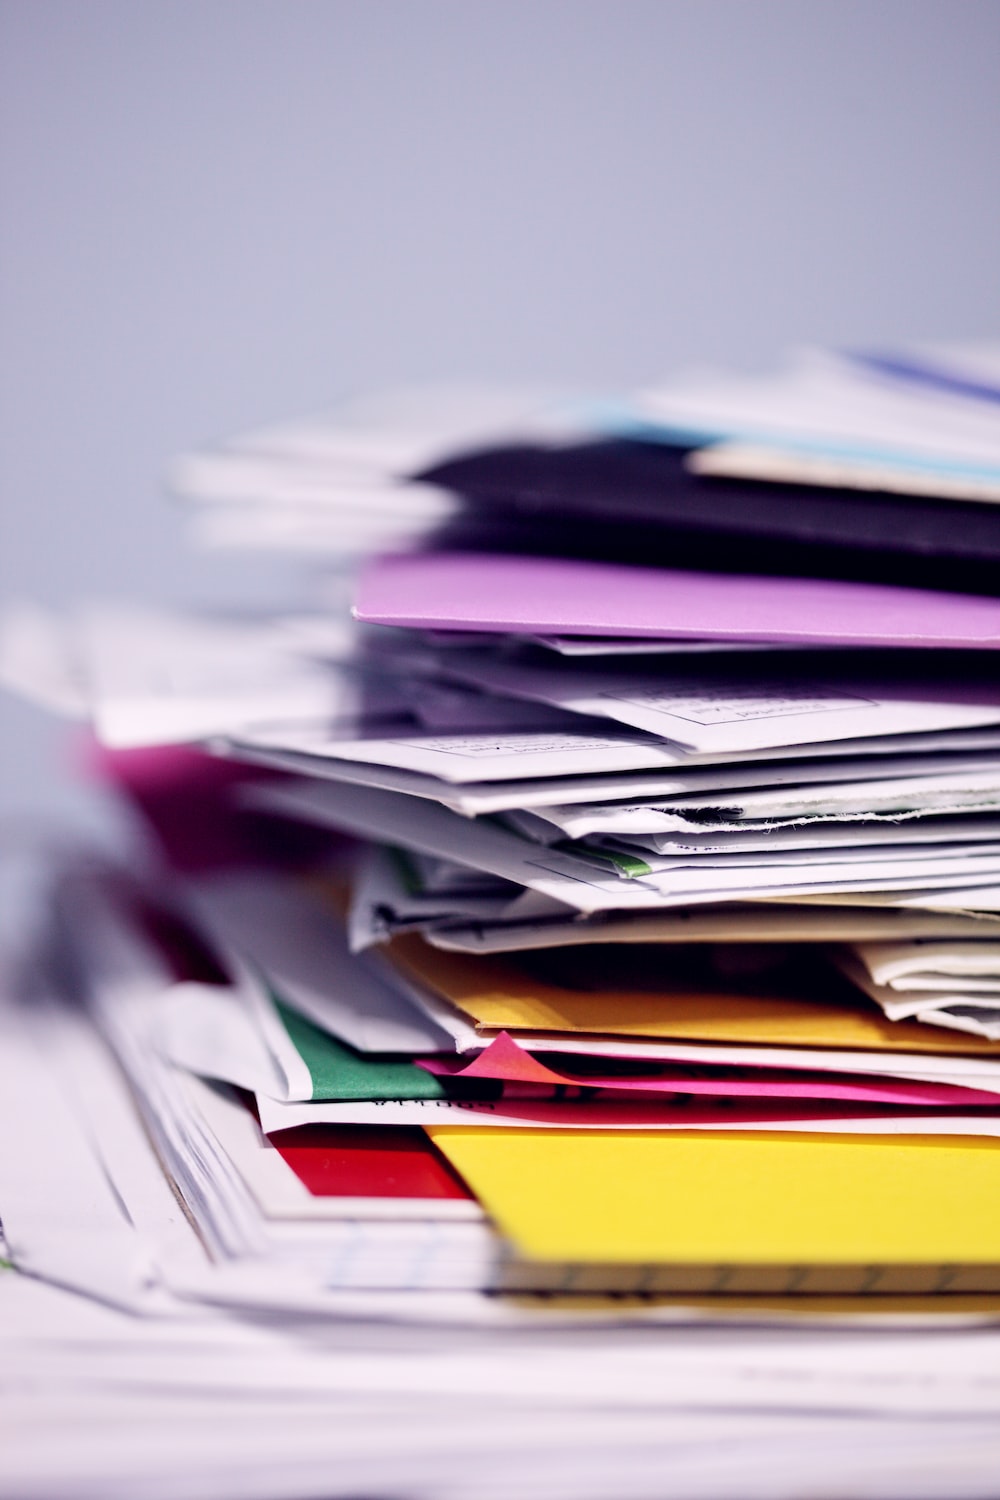 How do you declutter years of paperwork?